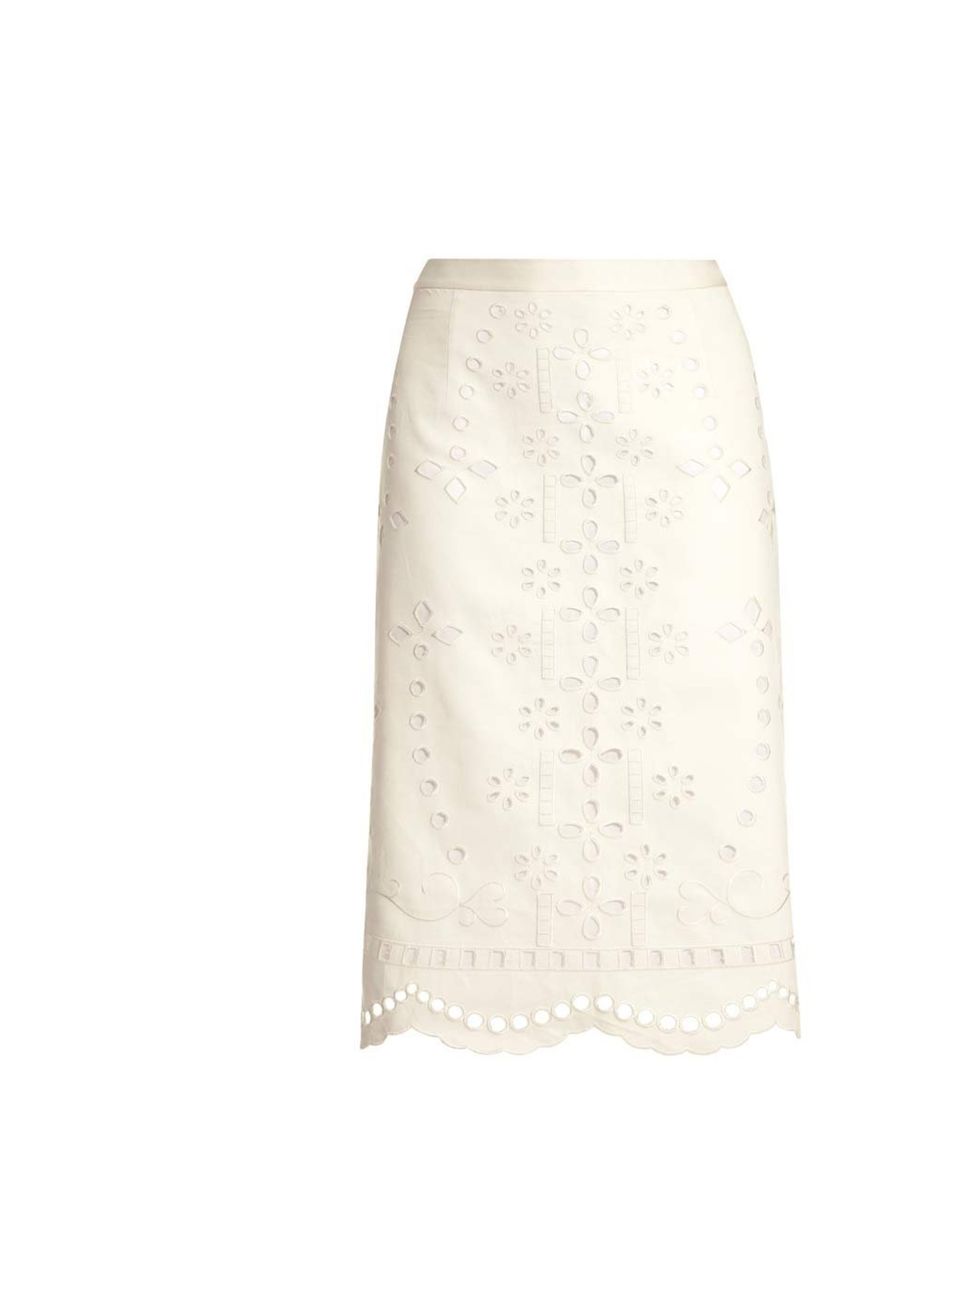 <p><a href="http://www.elleuk.com/fashion/news/elle-next-clutch-bag-may-issue">NEXT</a>  <a href="http://www.next.co.uk/g3818s4">broderie</a> skirt £45</p>